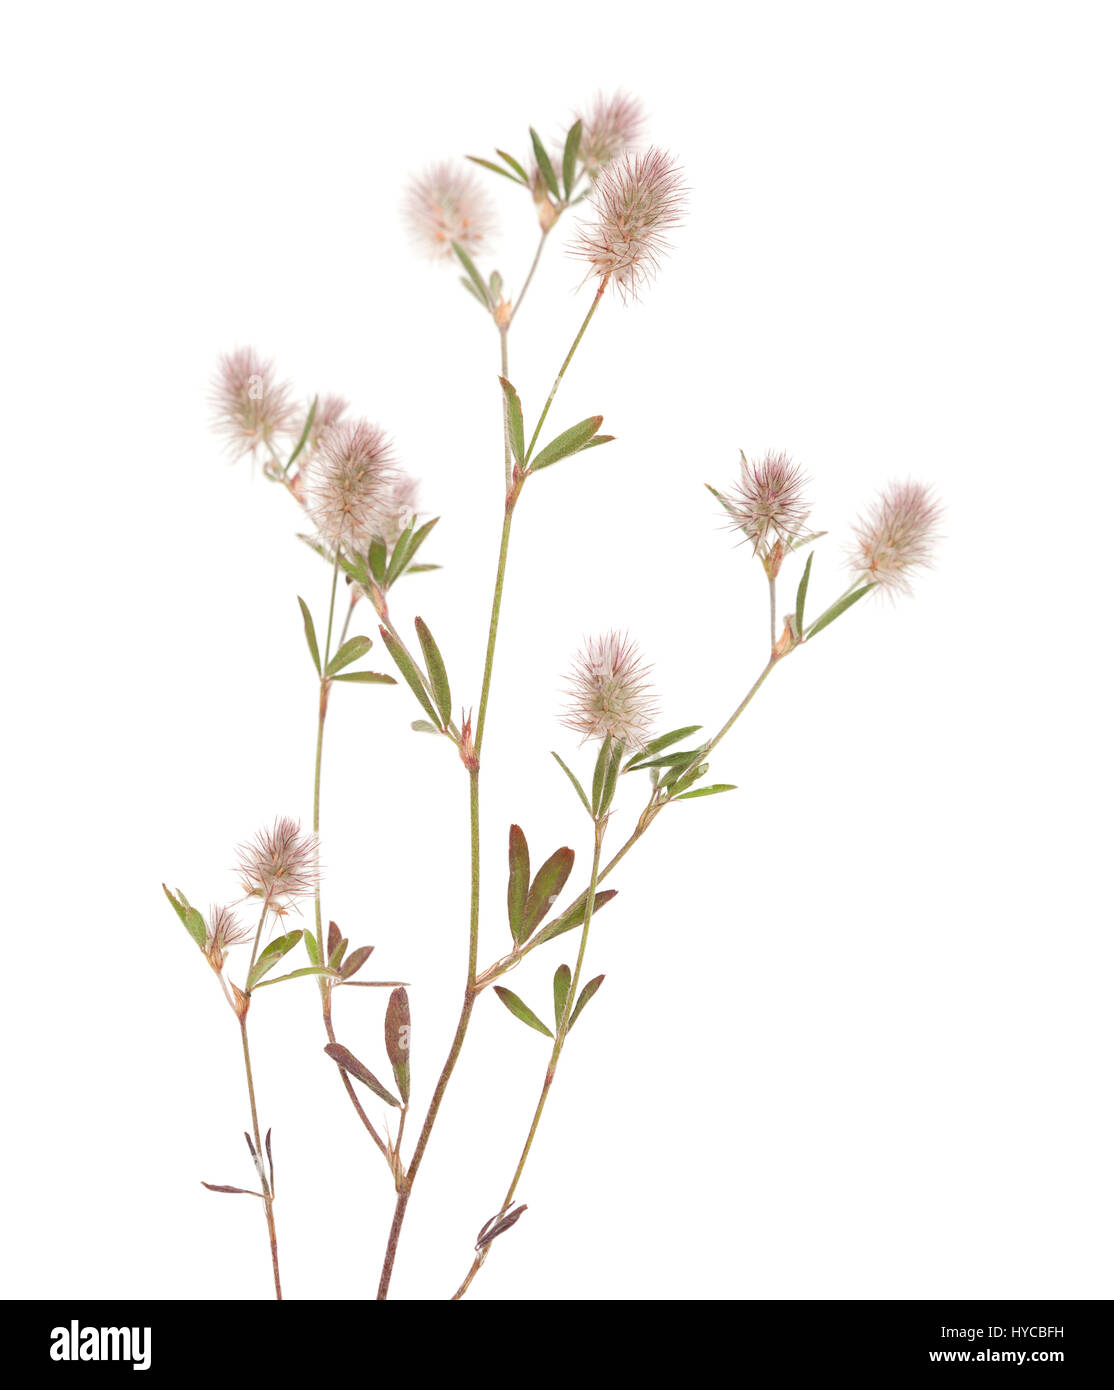 flora of Gran Canaria - Trifolium arvense, hare foot clover, isolated on white Stock Photo